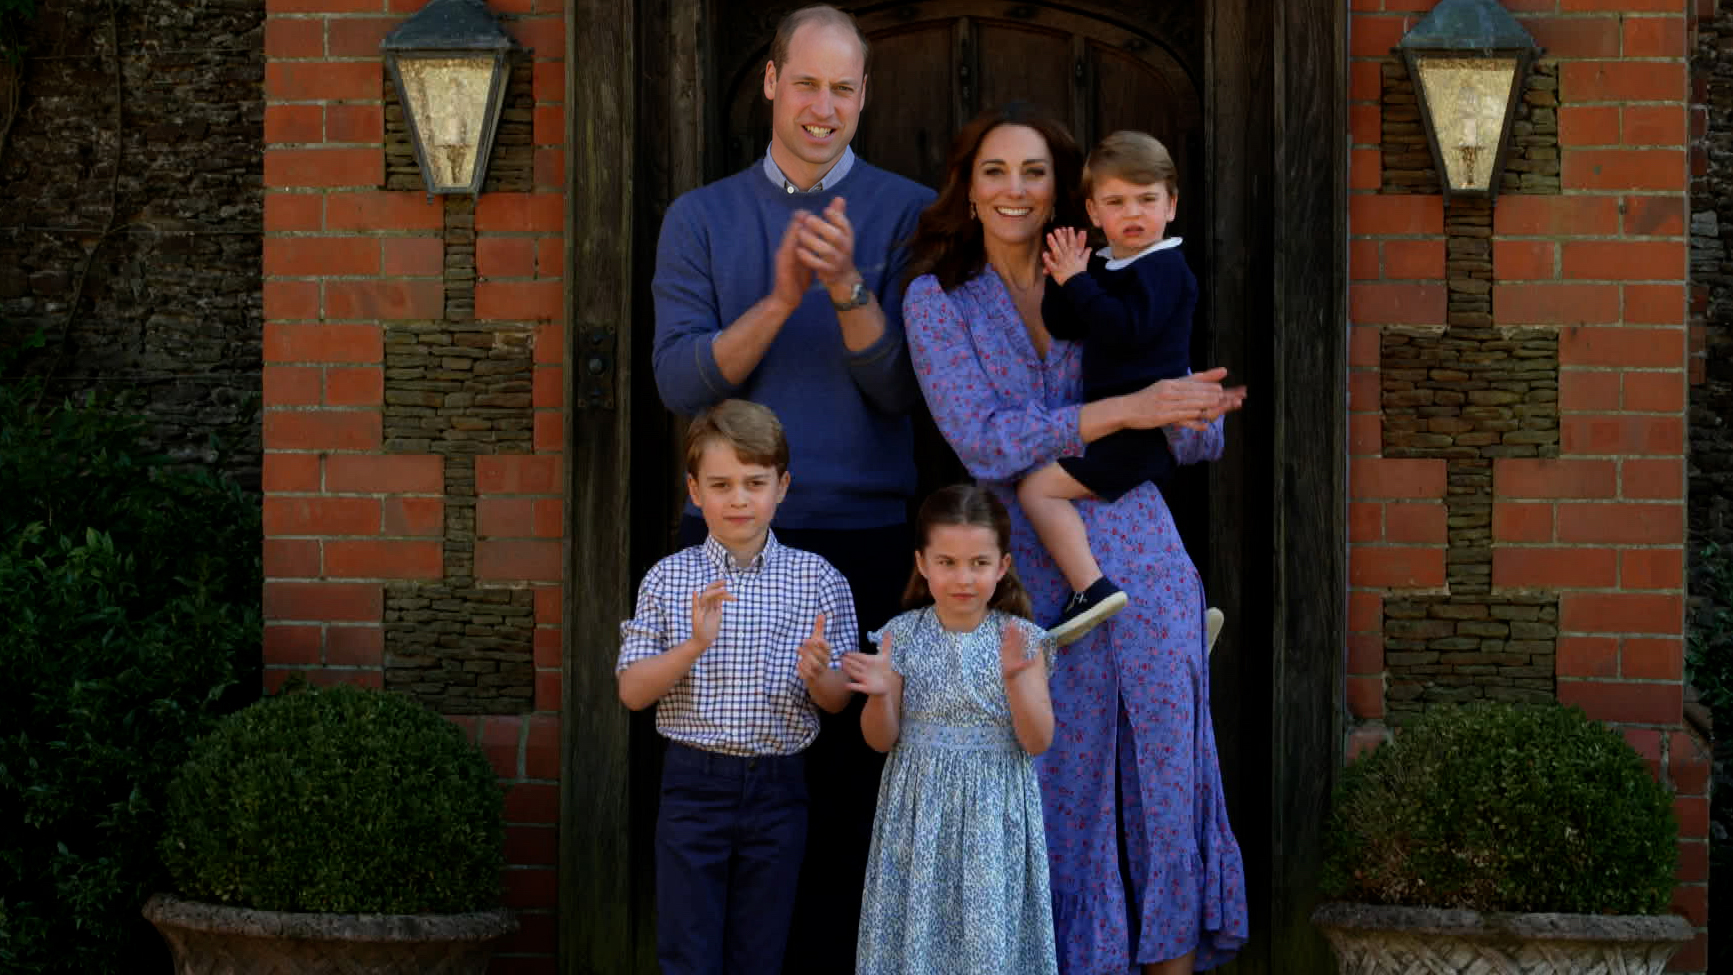 Prince William, Prince Louis, Princess Charlotte, Kate Middleton and Prince Louis posing for a picture as part of the BBC Children In Need and Comic Relief "Big Night In" event in London, England on April 23, 2020 | Source: Getty Images